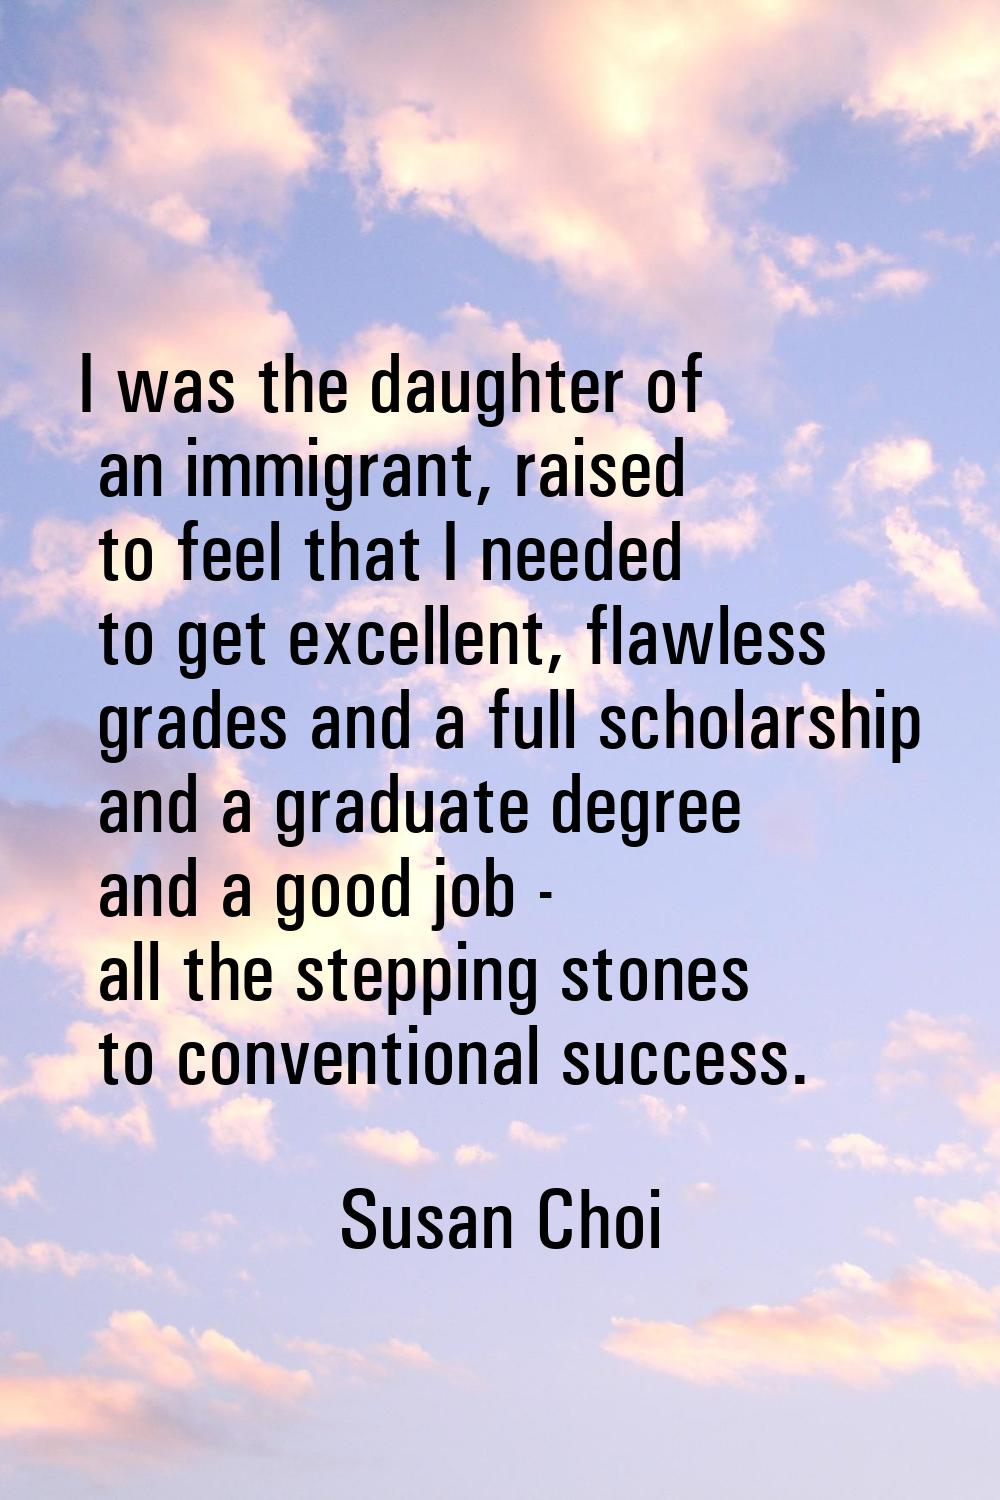 I was the daughter of an immigrant, raised to feel that I needed to get excellent, flawless grades 